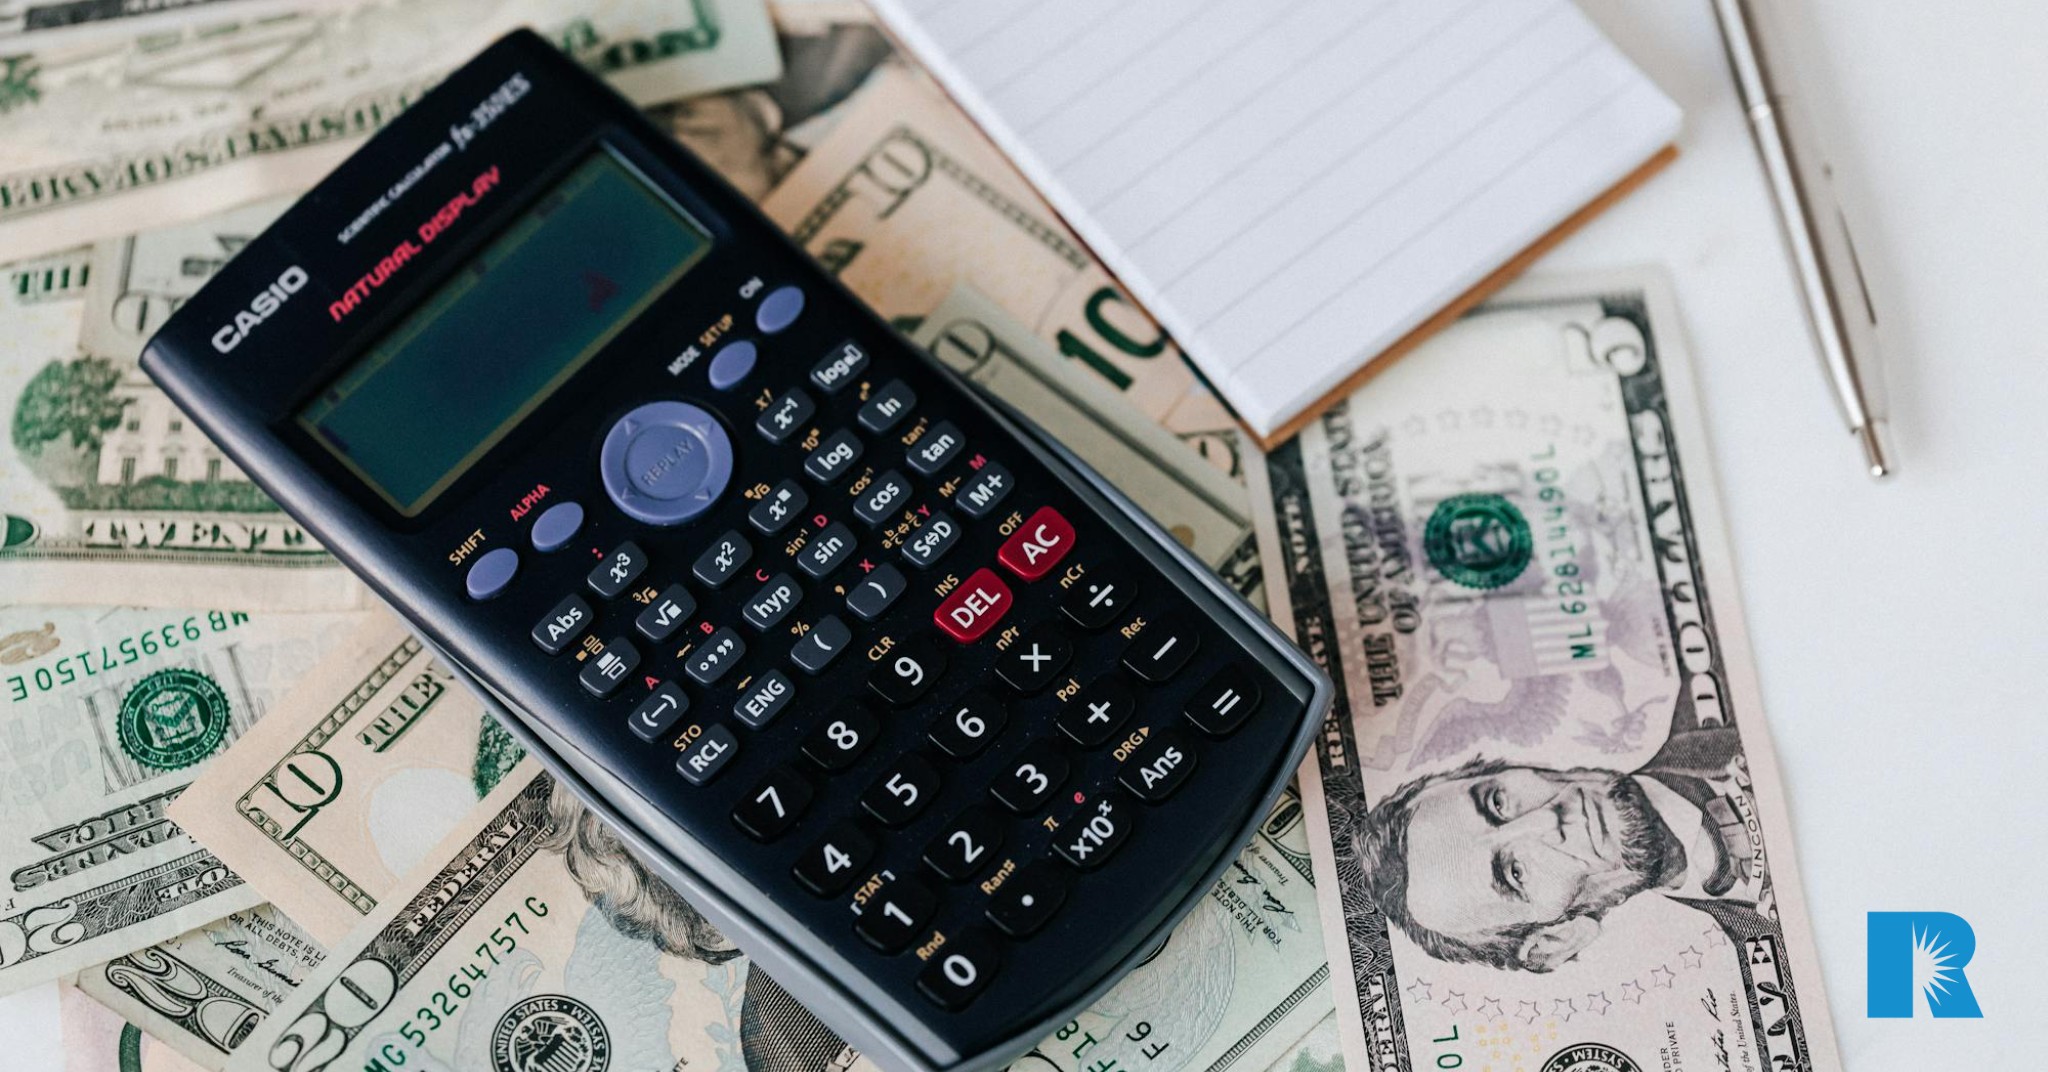 Photo illustration showing a calculator and cash on an agent's desk.